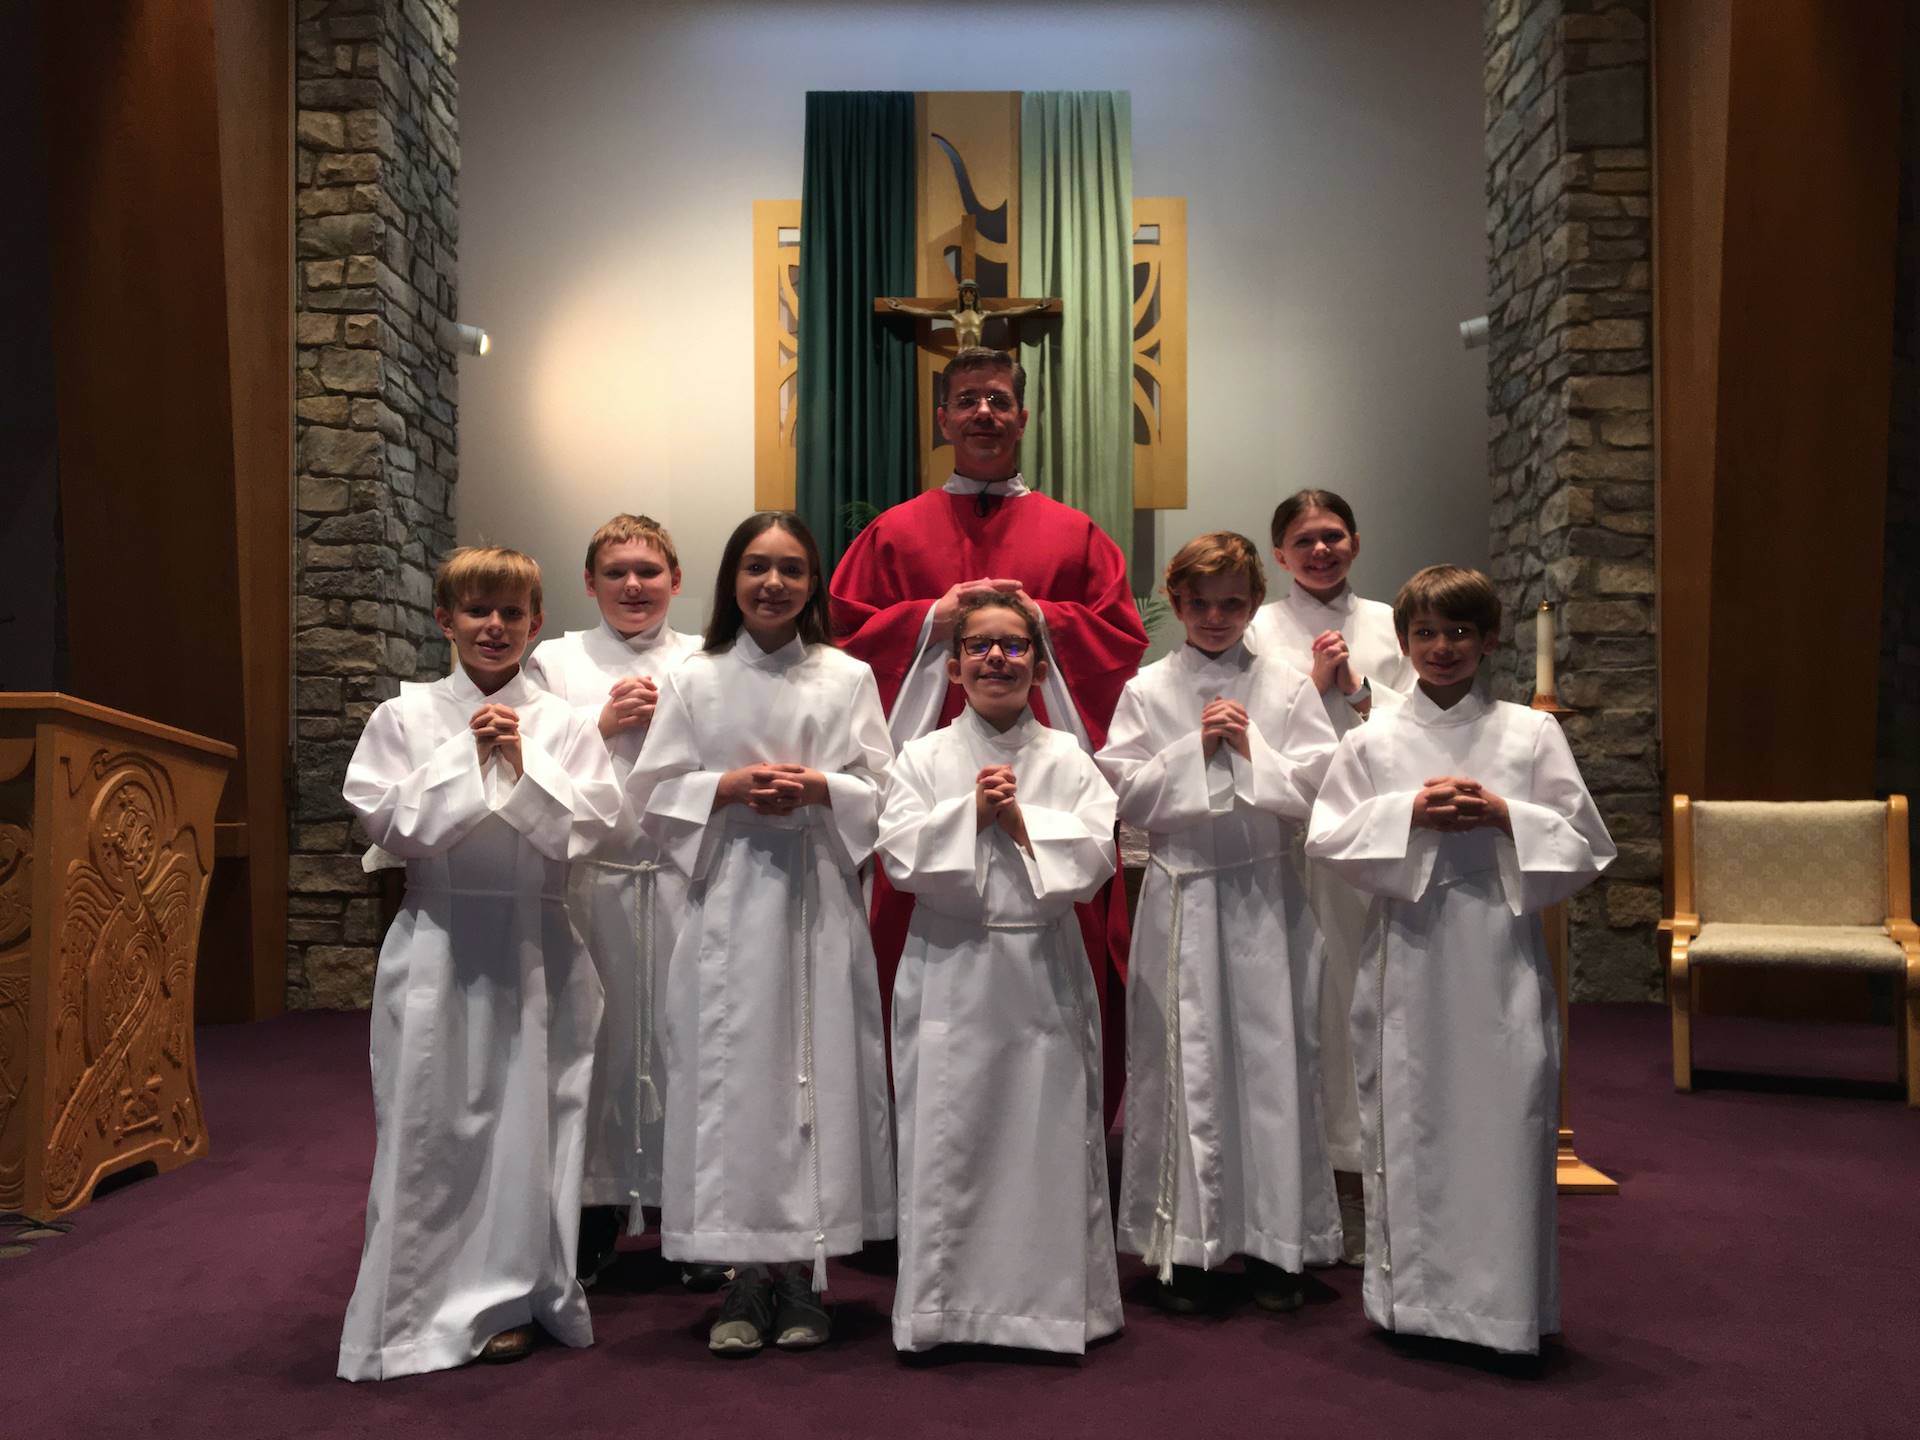 Fr. Tom and the newly trained altar servers pose for a picture